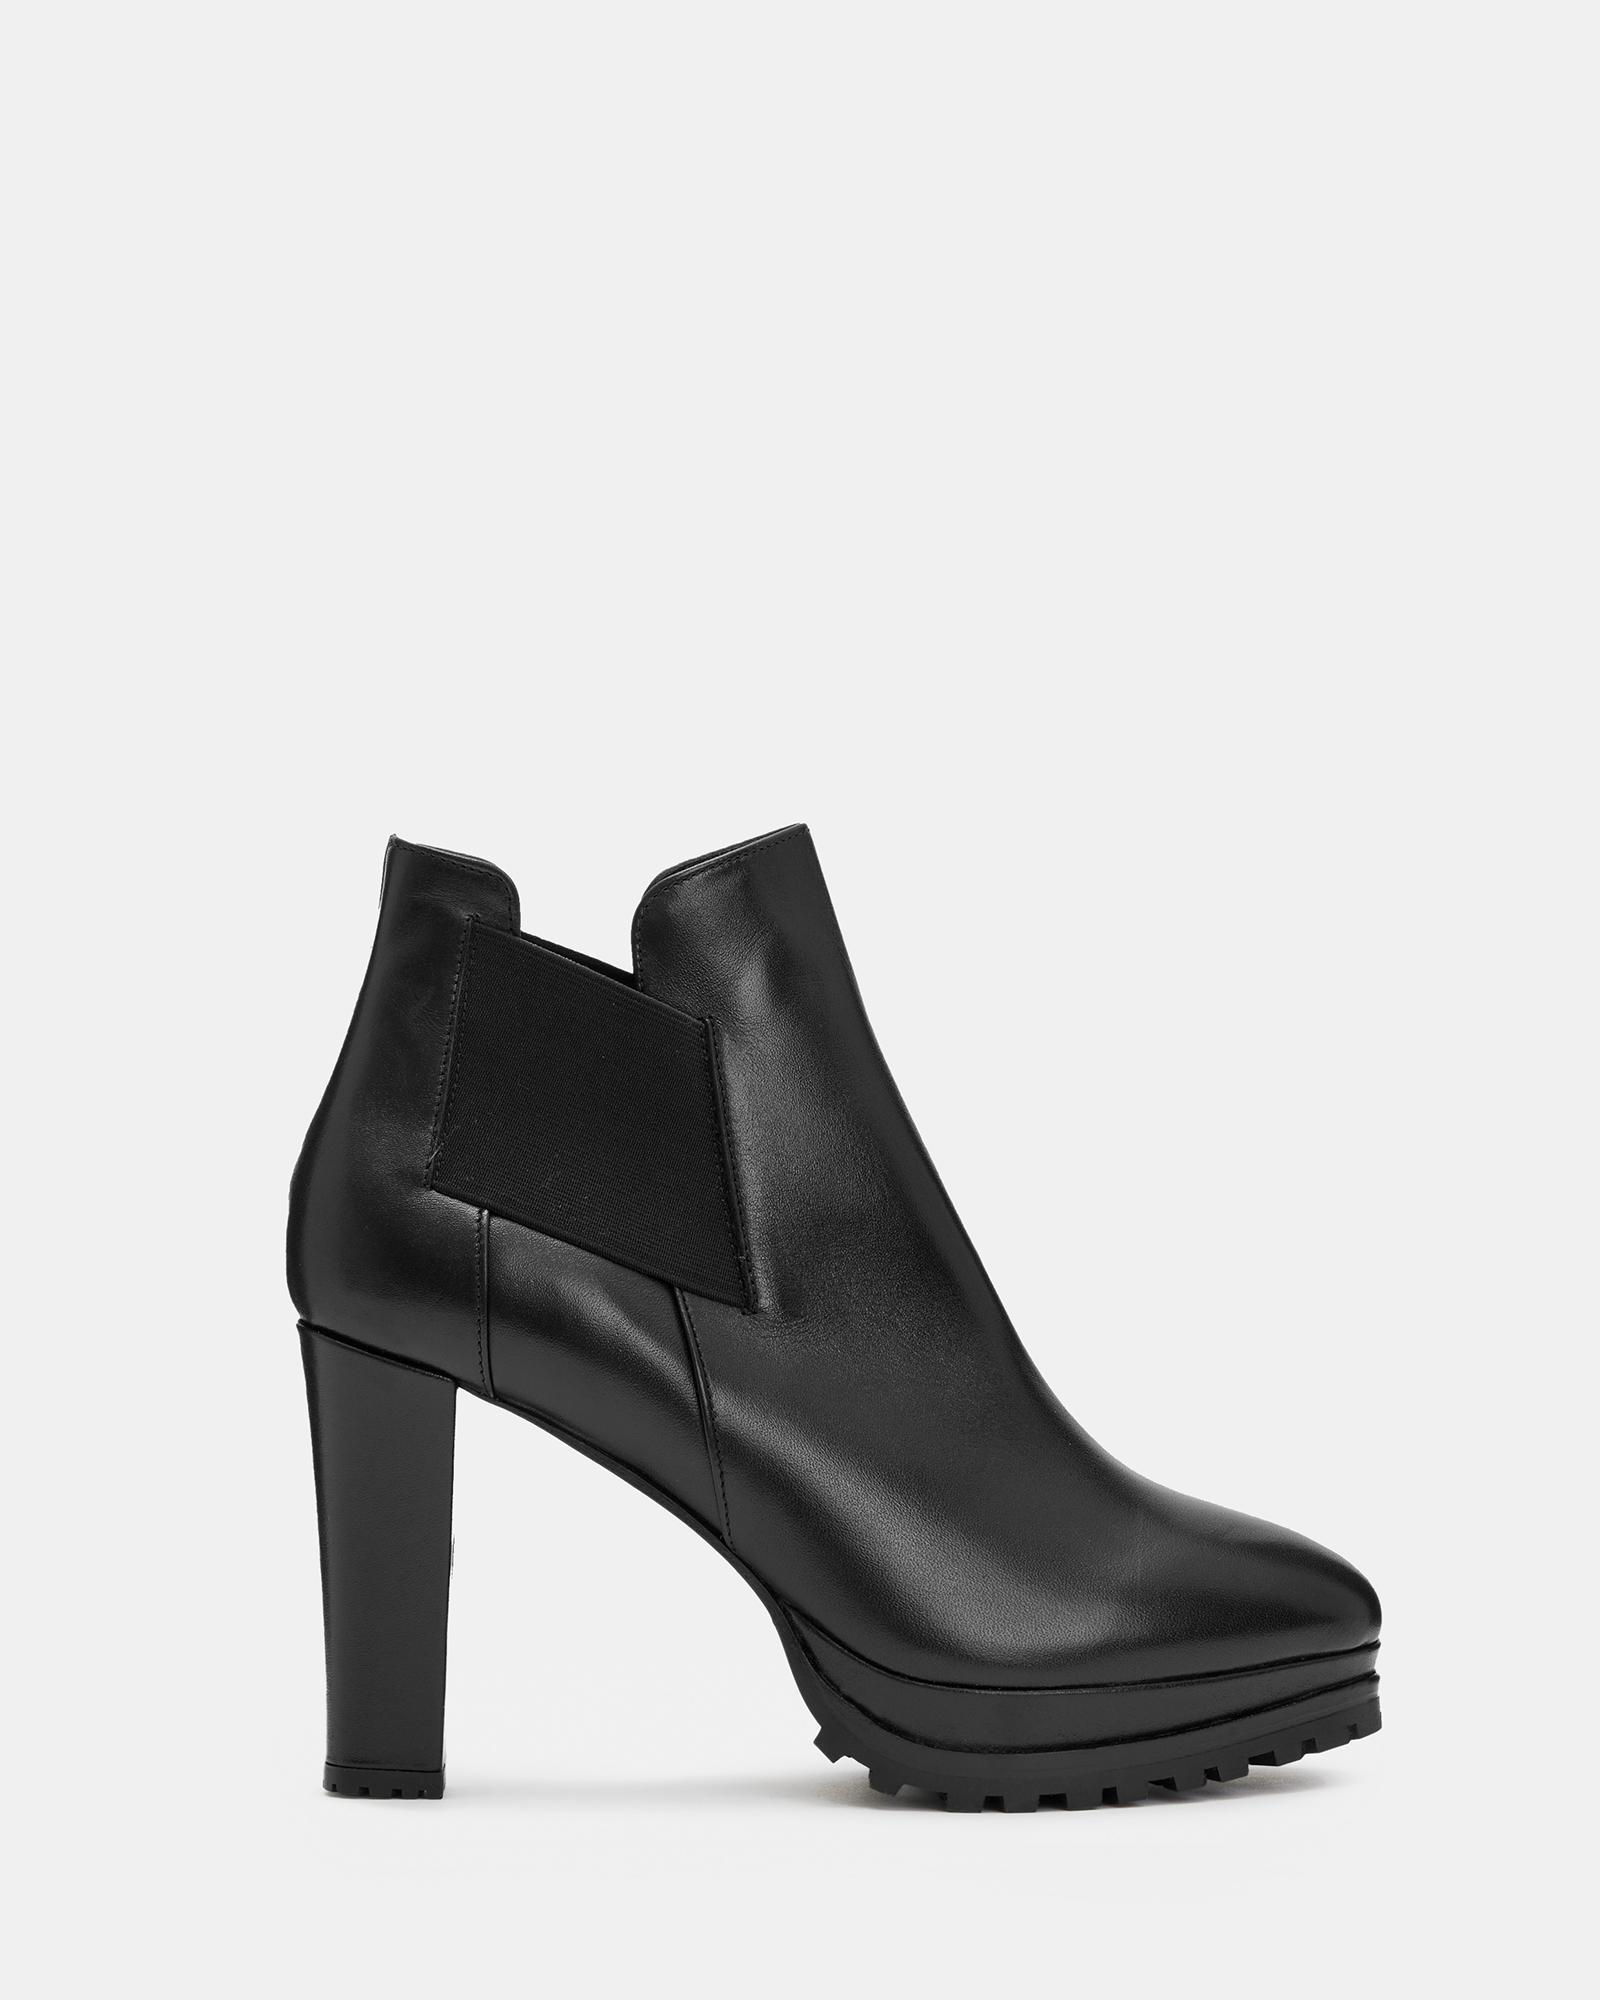 AllSaints Sarris Leather Boots Product Image